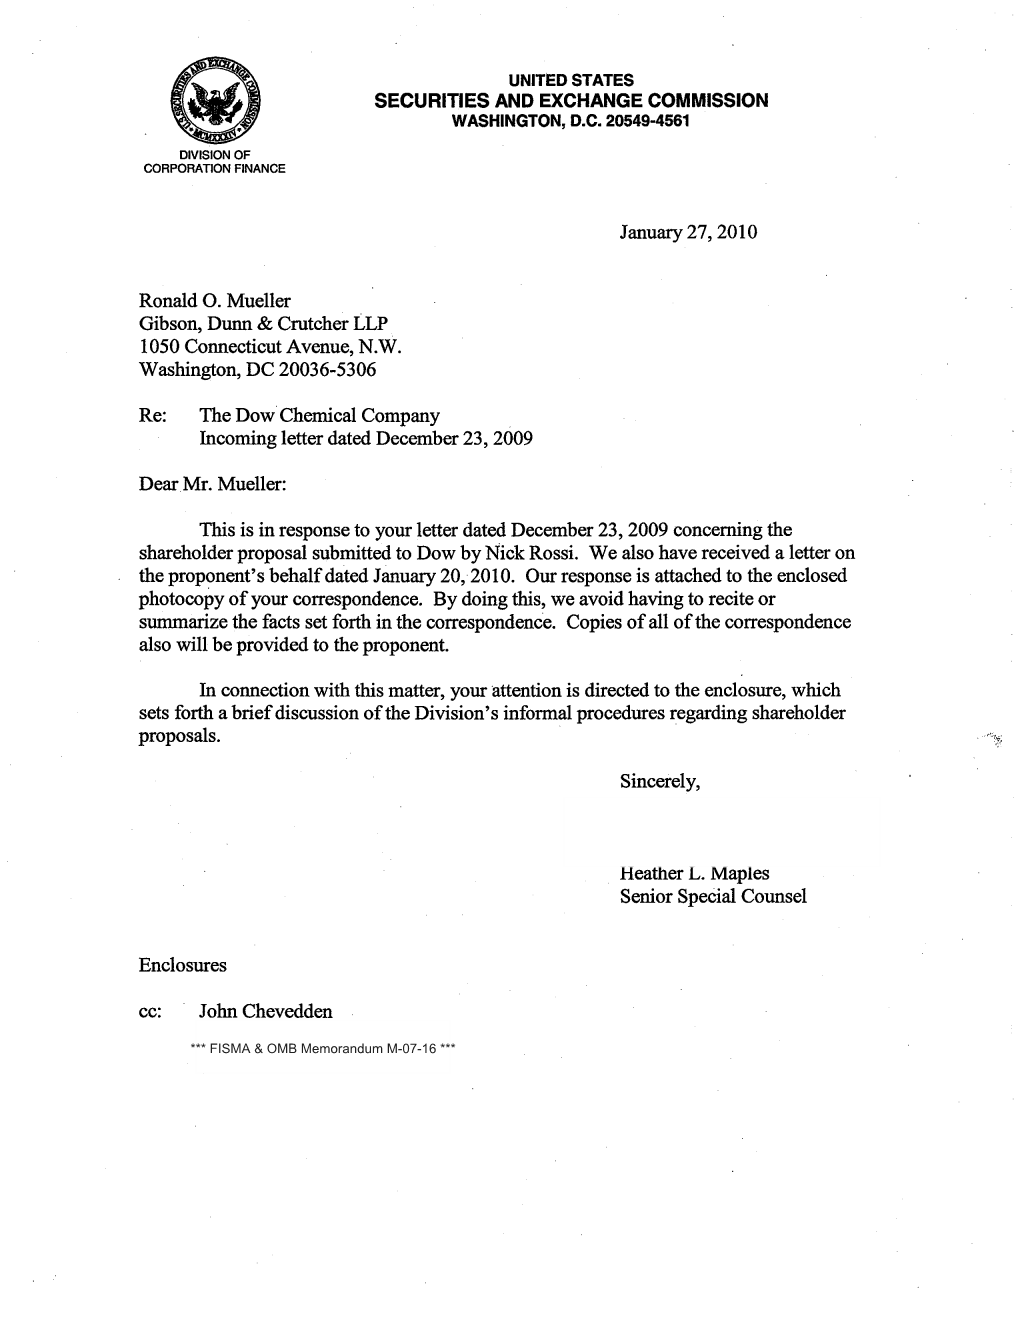 The Dow Chemical Company Incoming Letter Dated December 23, 2009